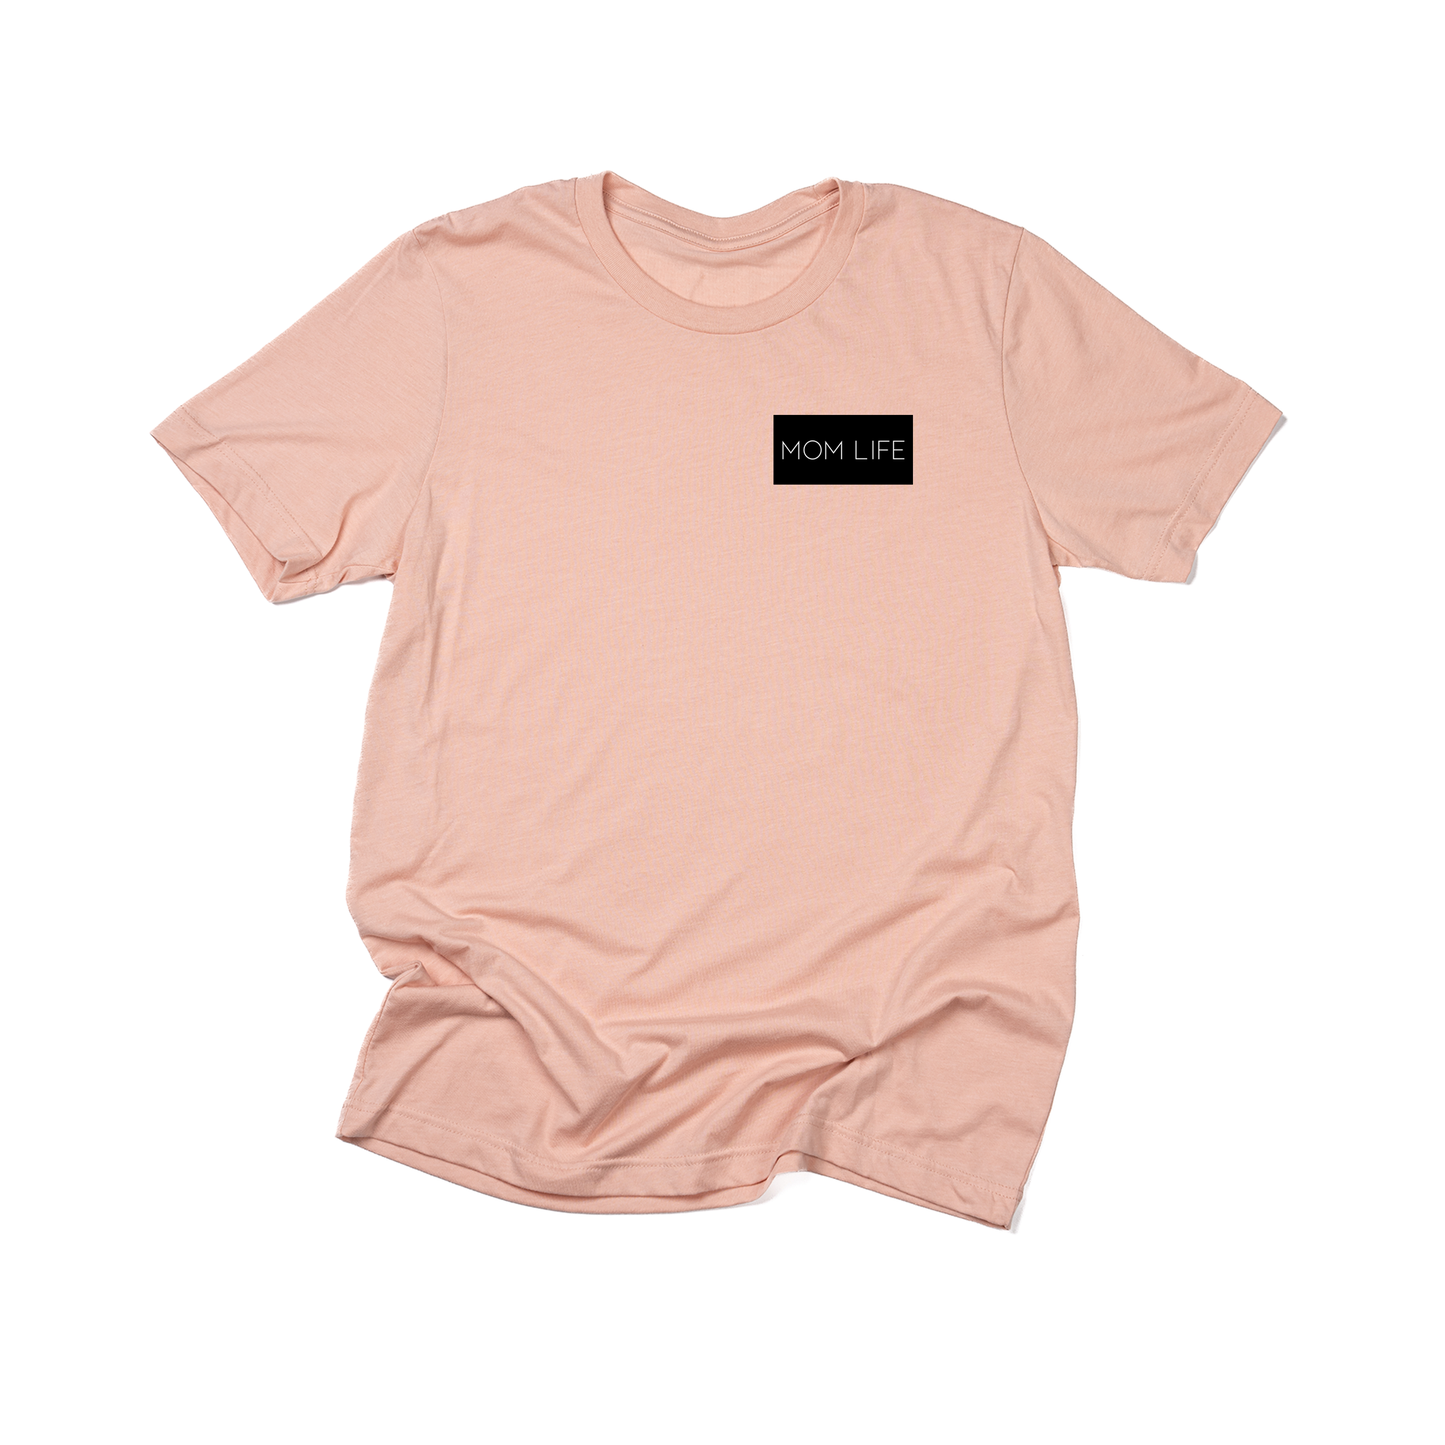 Mom Life (Boxed Collection, Pocket, Black Box/White Text) - Tee (Peach)